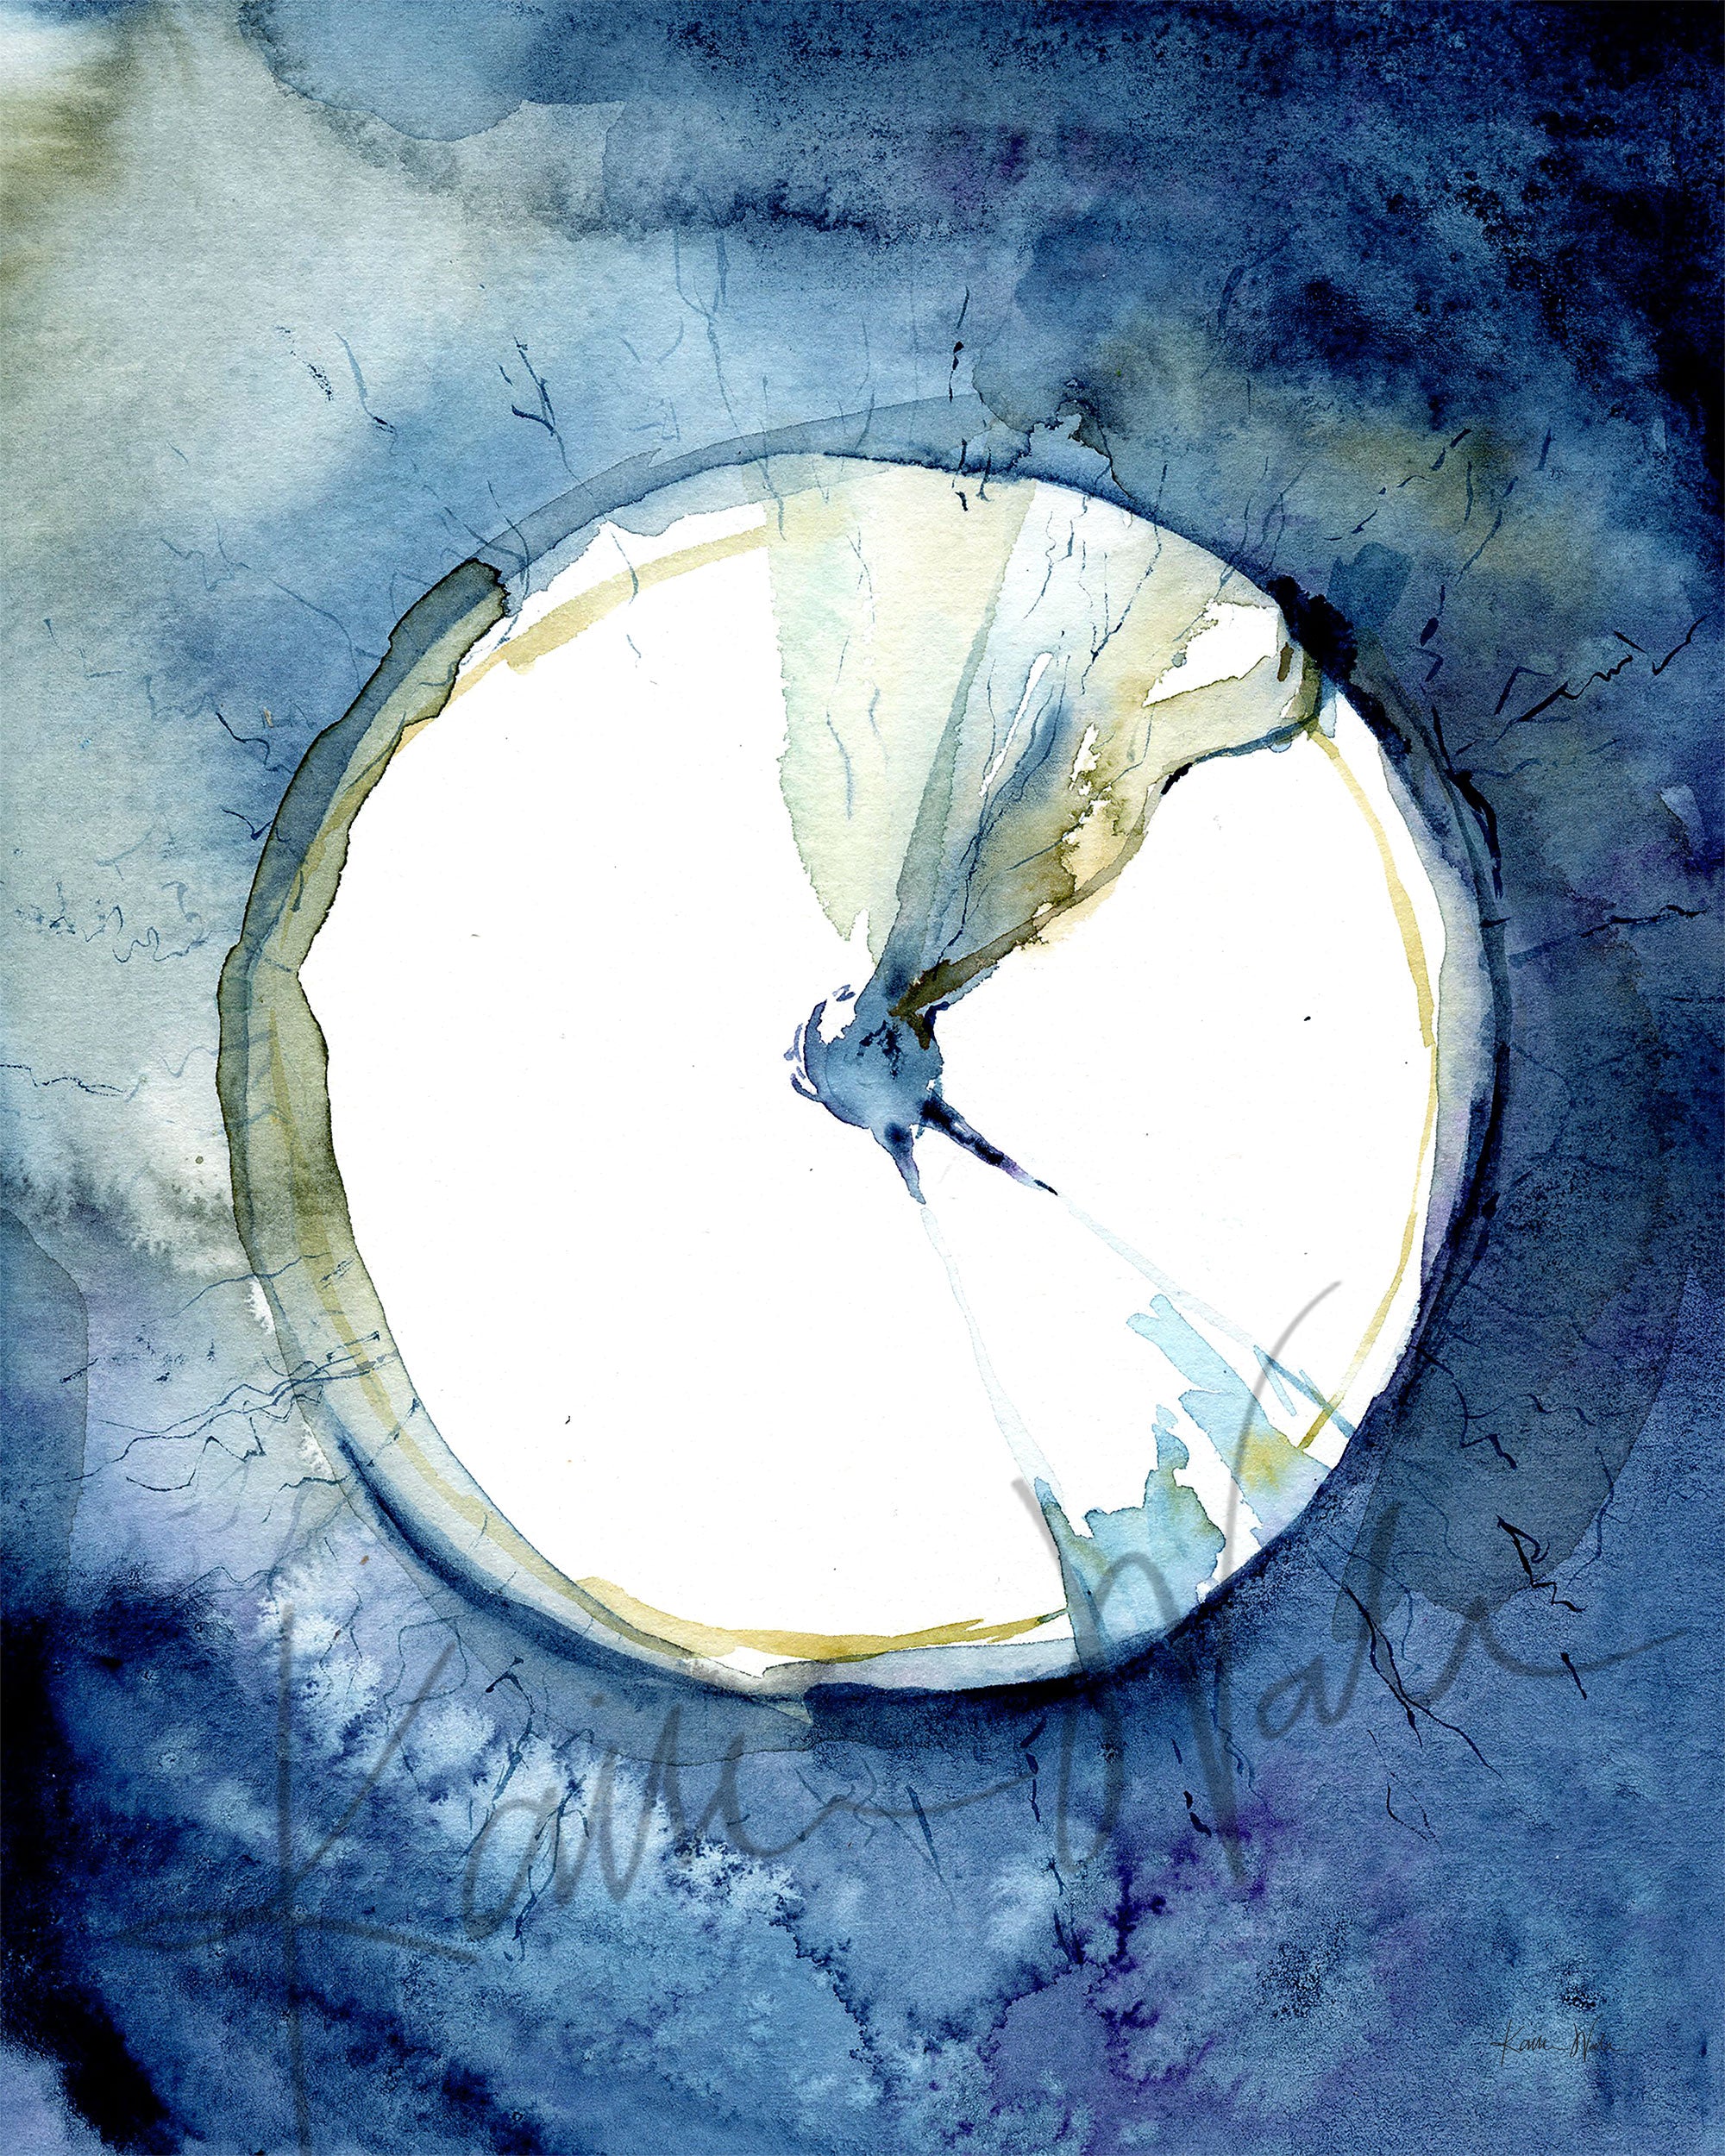 Unframed watercolor painting of an eardrum.